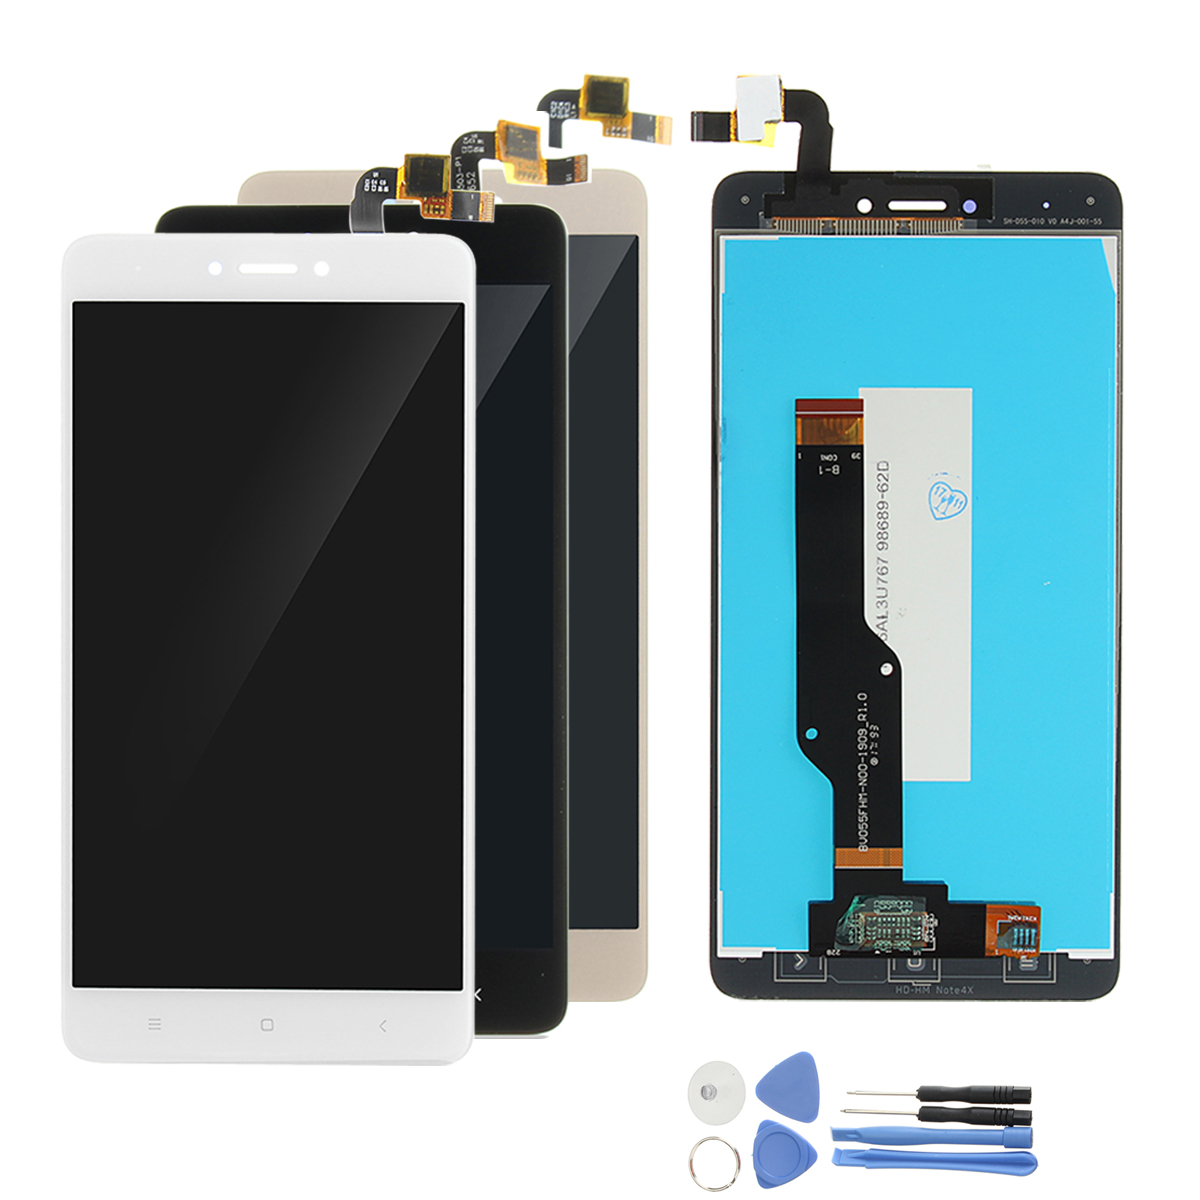 

LCD Display+Touch Screen Digitizer Replacement With Tools For Xiaomi Redmi Note 4/Redmi Note 4X